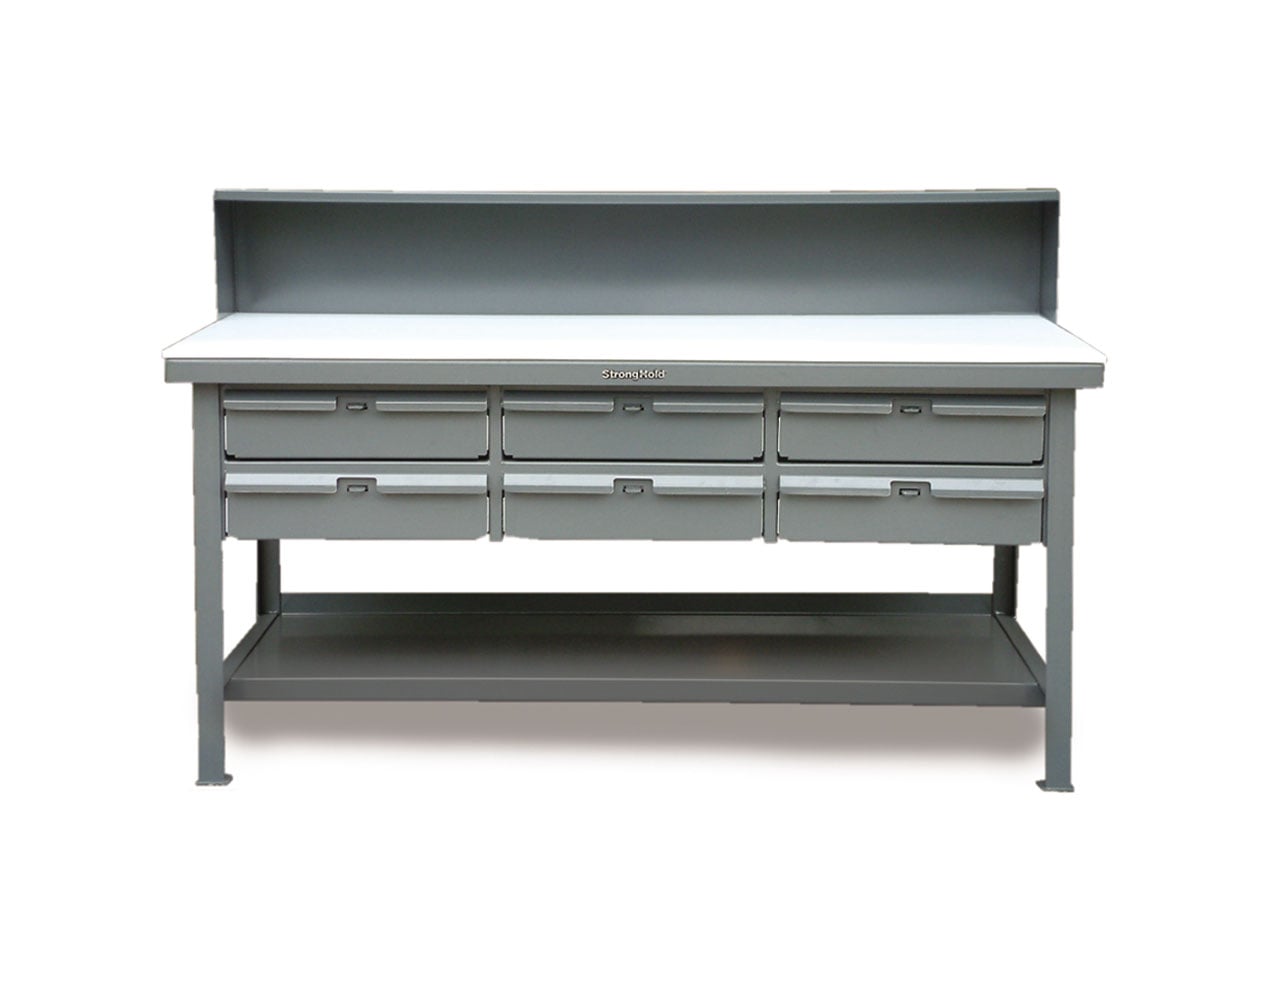 Extreme Duty 7 GA Shop Table with Stainless Steel Top, Riser Shelf, 6 Drawers - 60 In. W x 36 In. D x 48 In. H